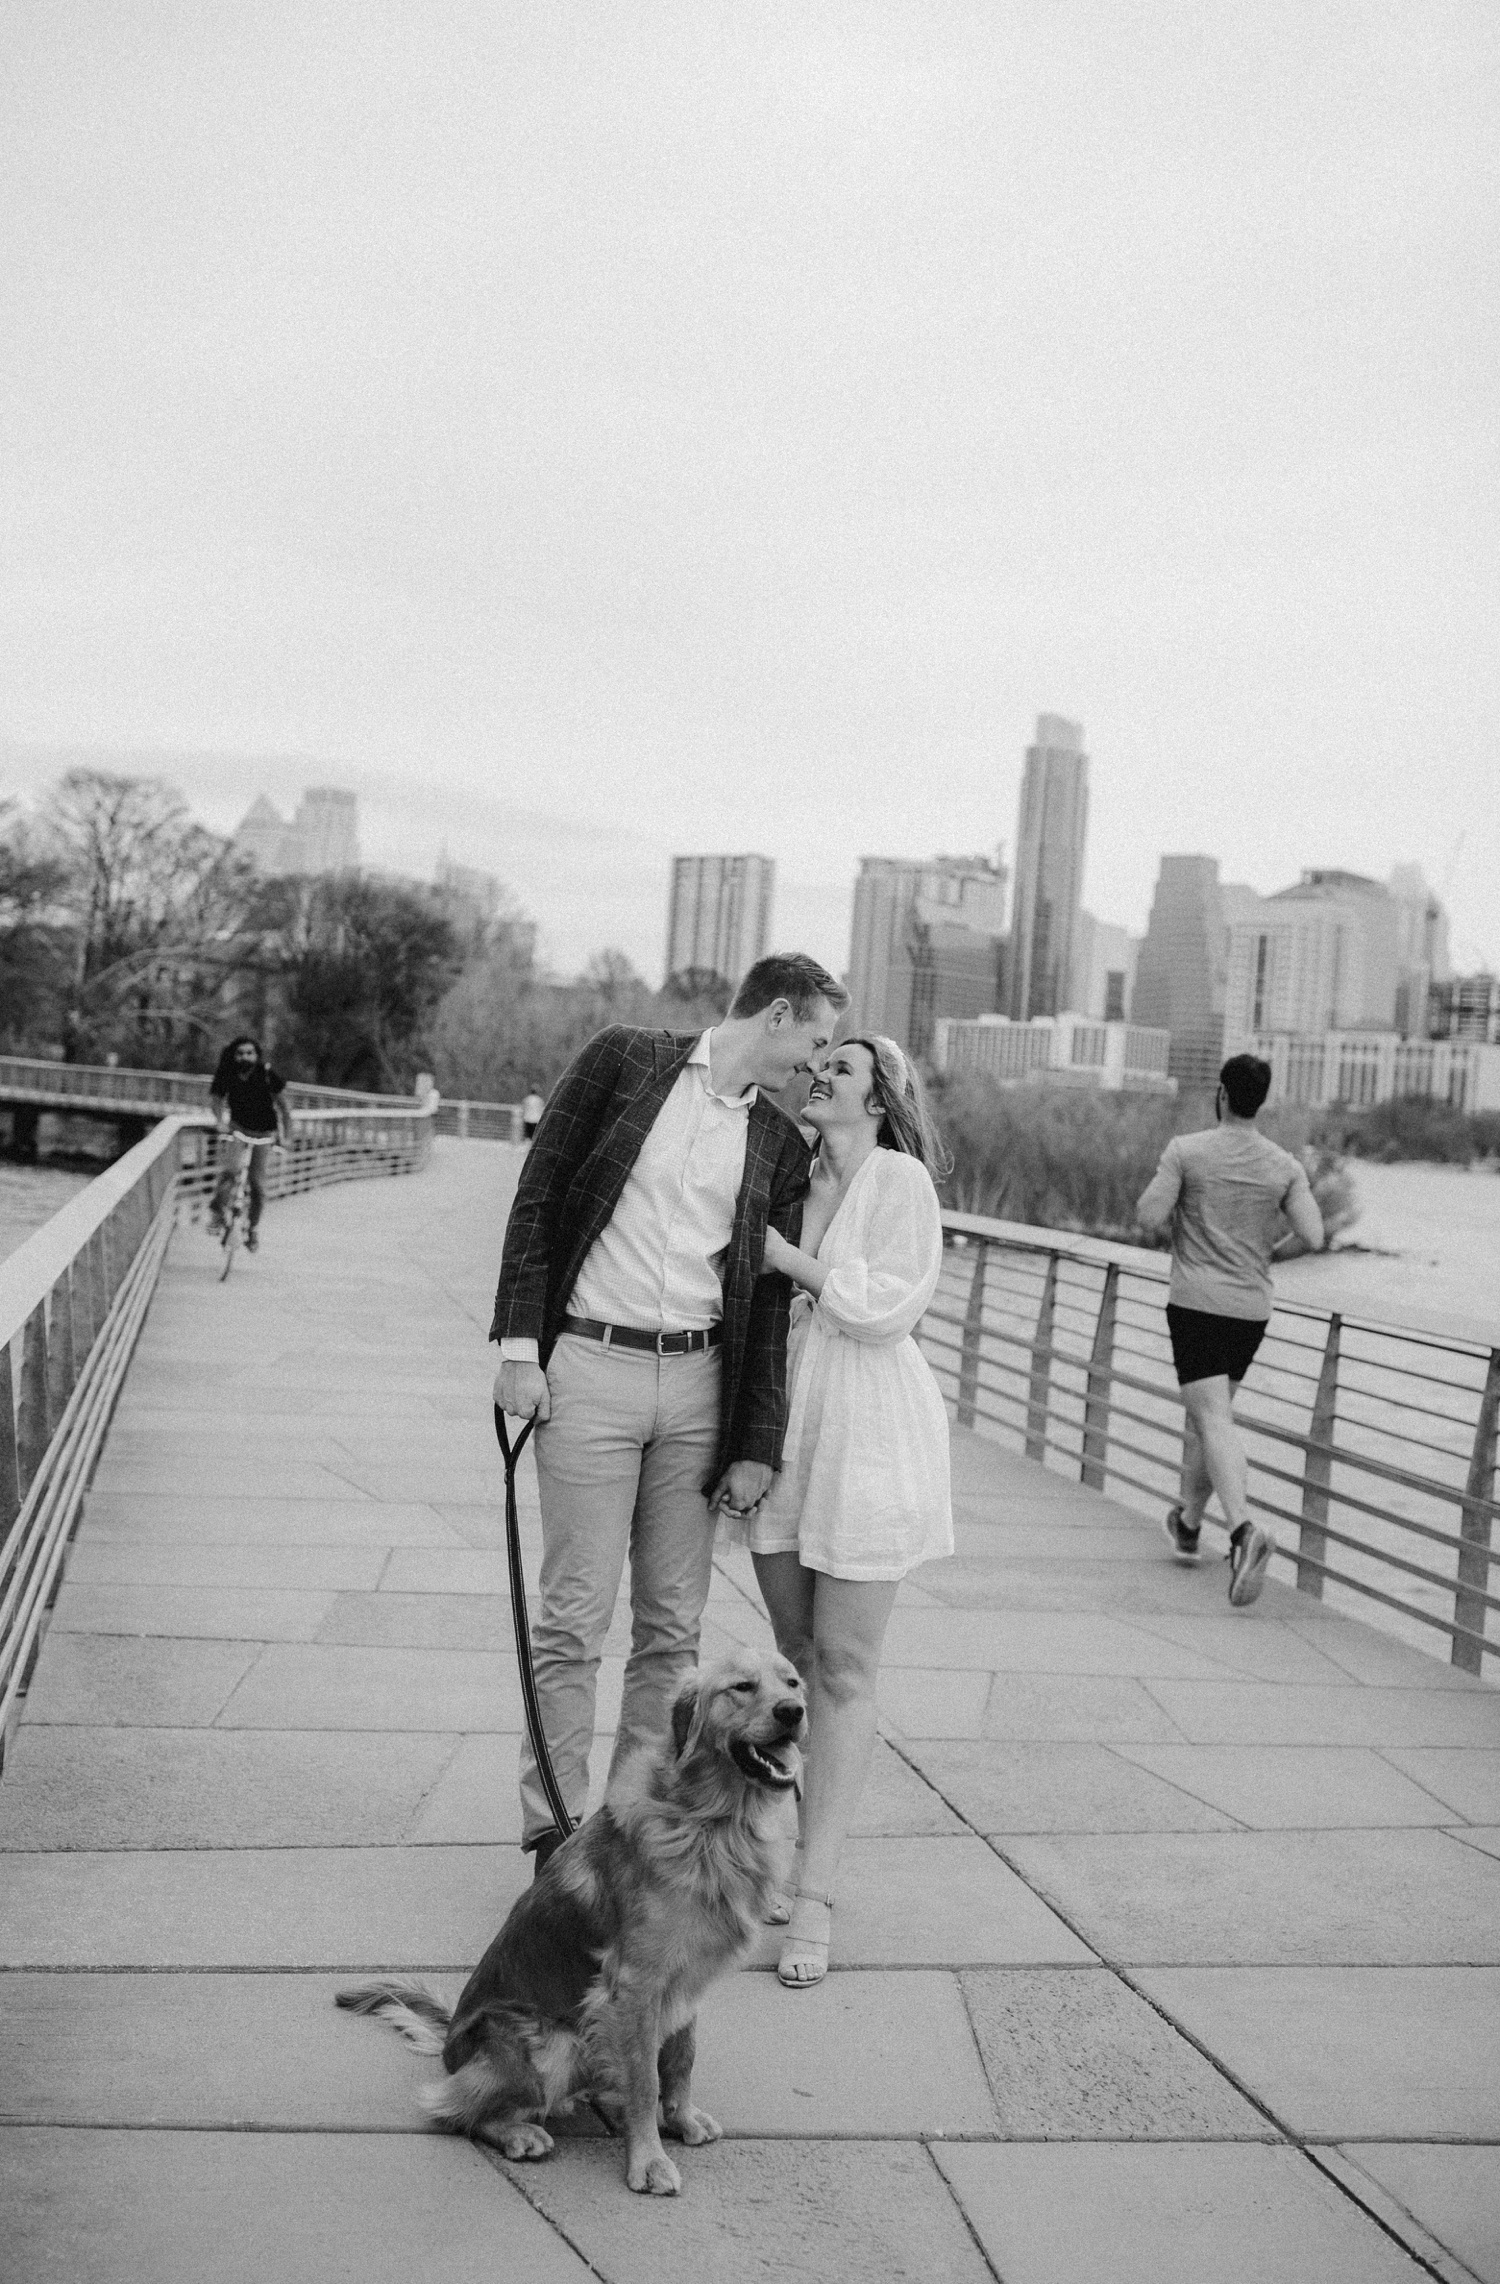 Ideas for engagement photos with your dog